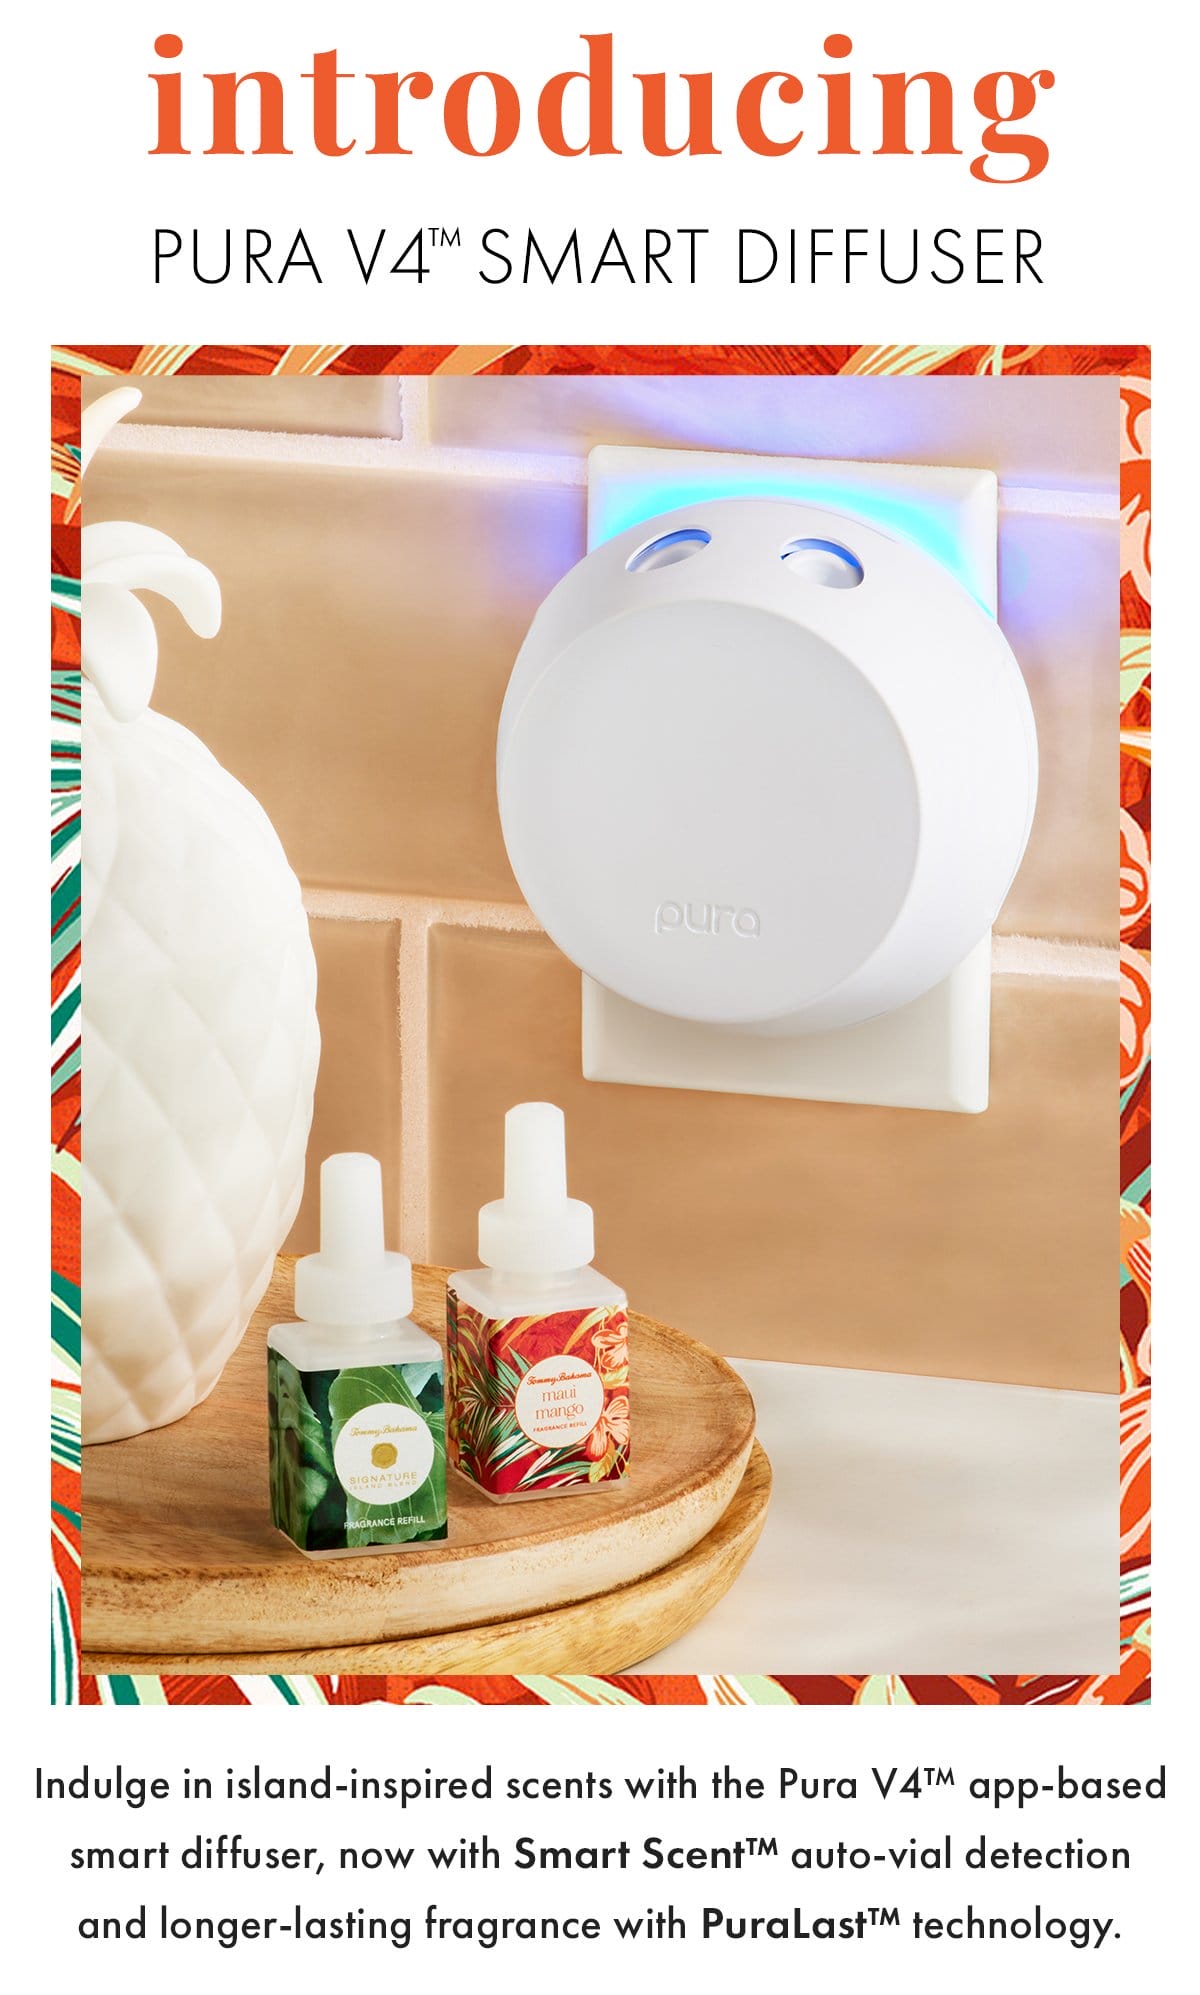 Introducing Pura V4 Diffuser. Indulge in island-inspired scents with the Pura V4 app-based smart diffuser, now with Smart Scent auto-vial detection and longer-lasting fragrance with PuraLast technology.